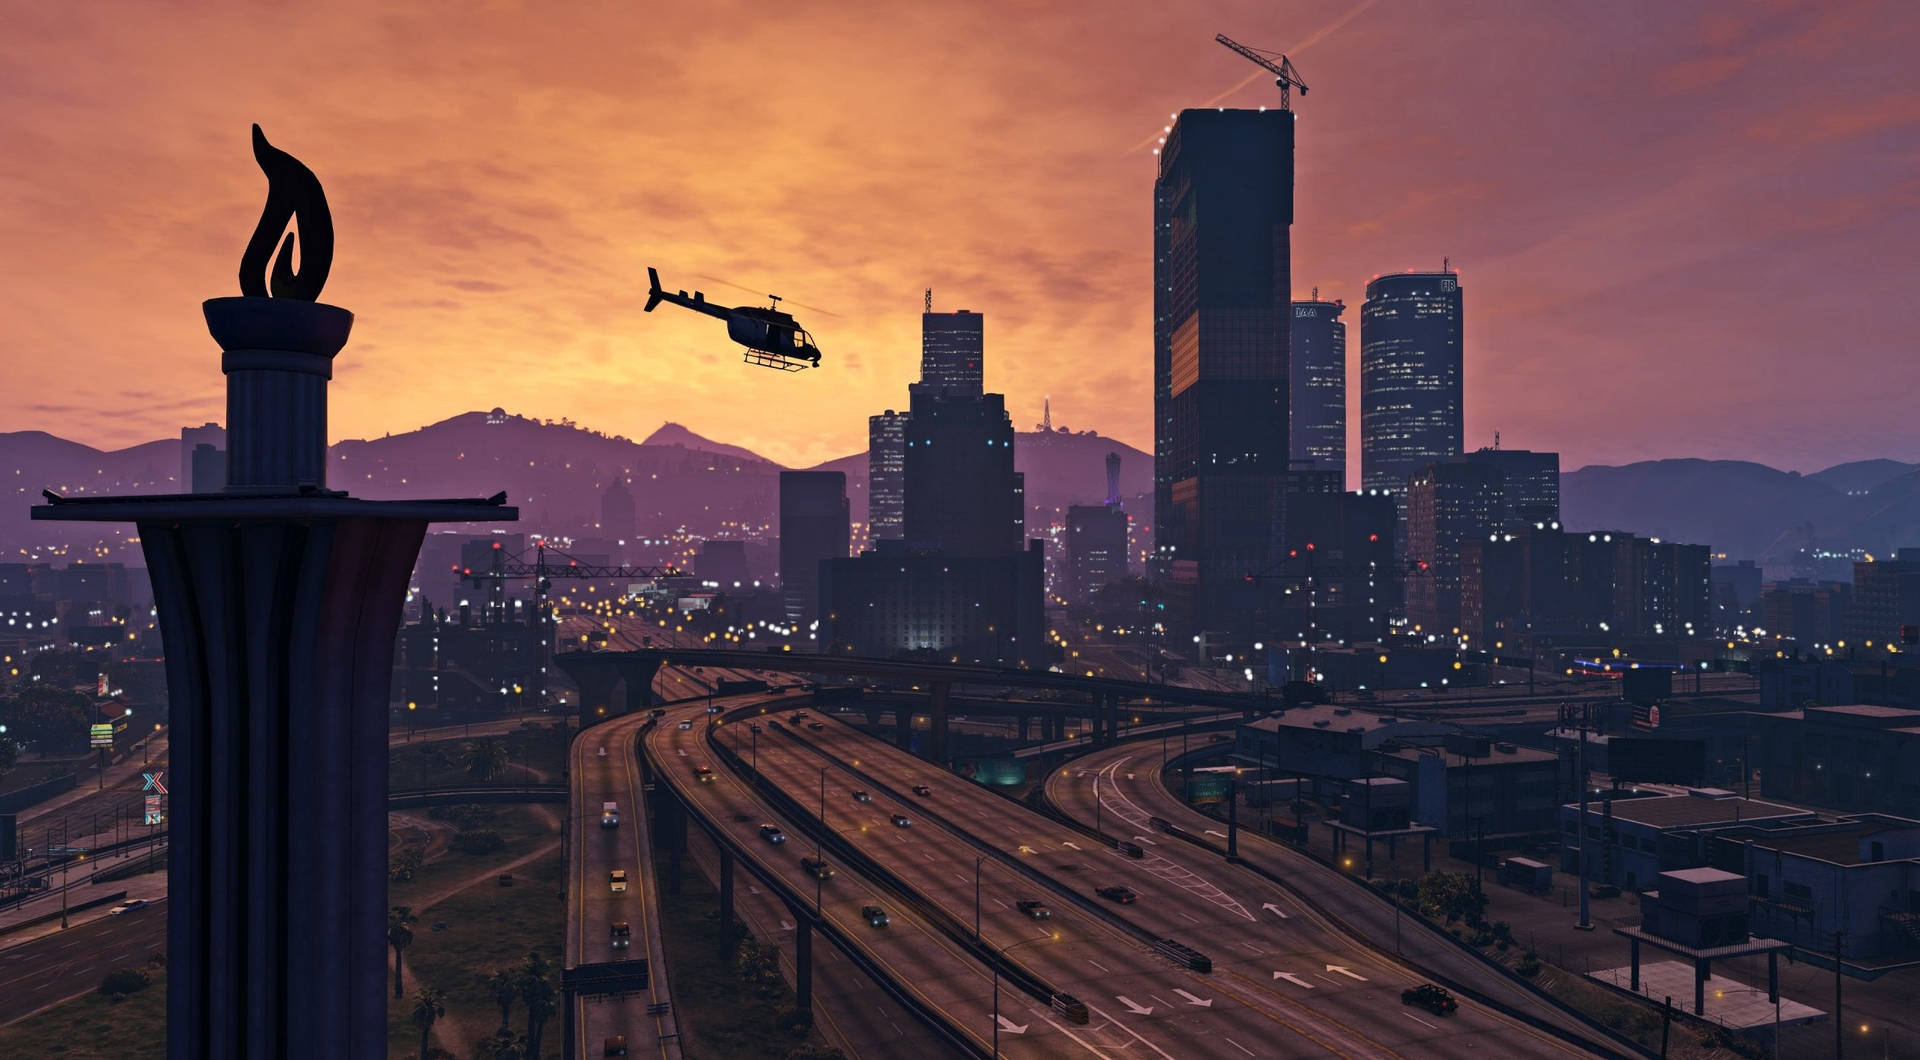 Gta 5 2560x1440 Surveilling Helicopter Background